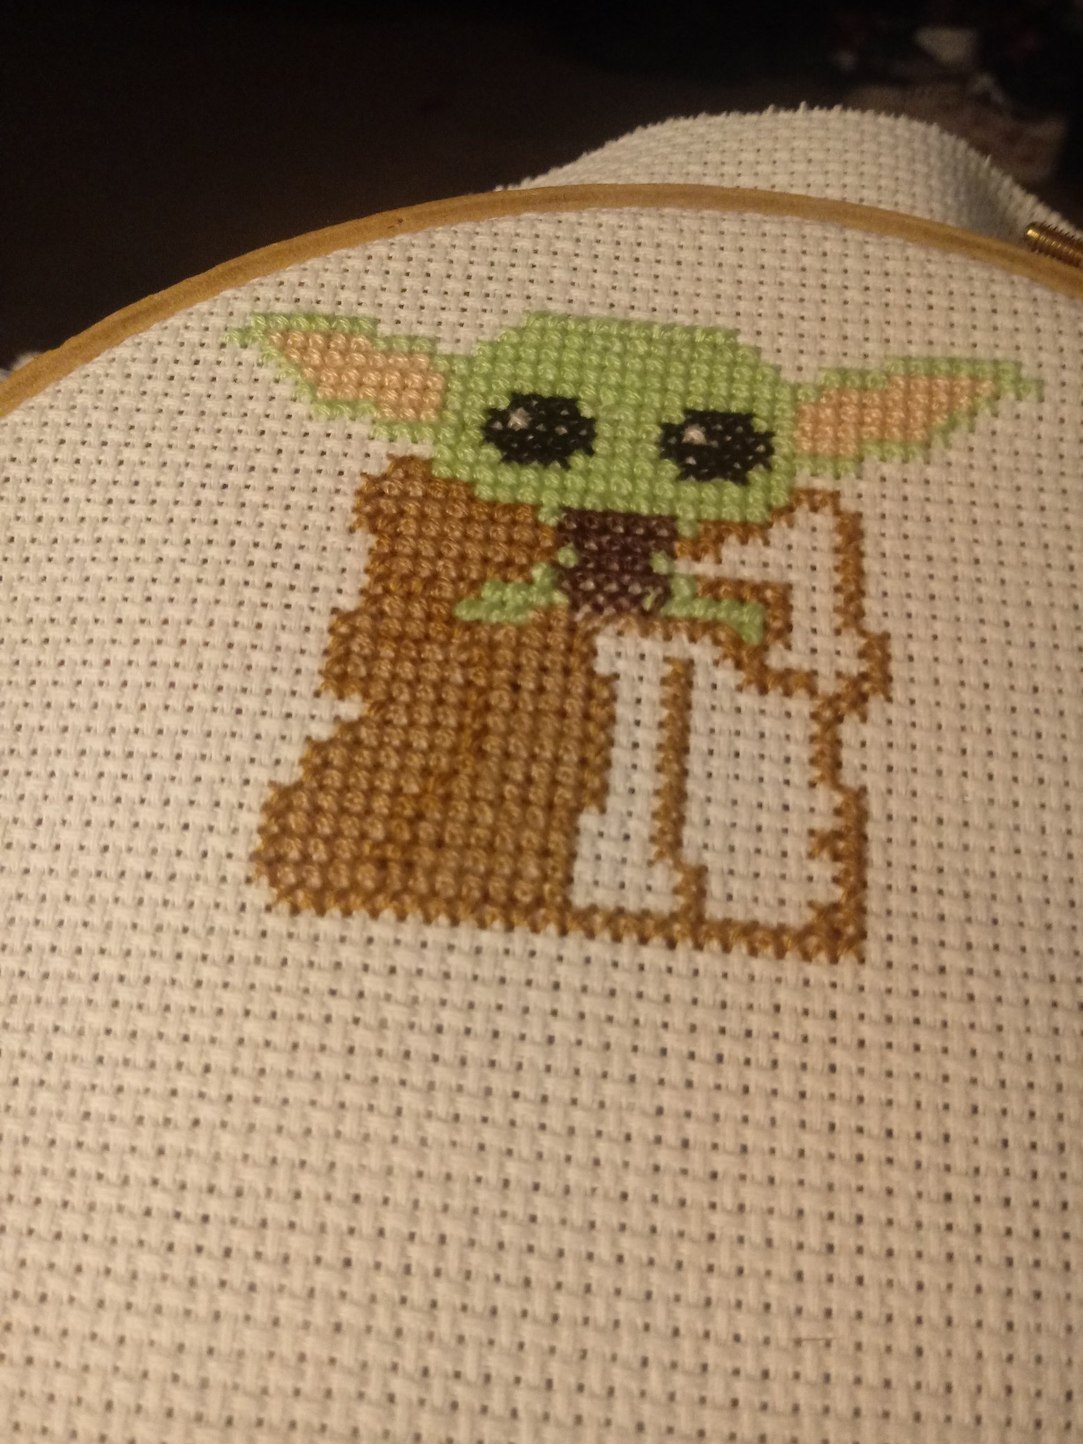 Working on a baby Yoda cross stitch how do you think its going - meme